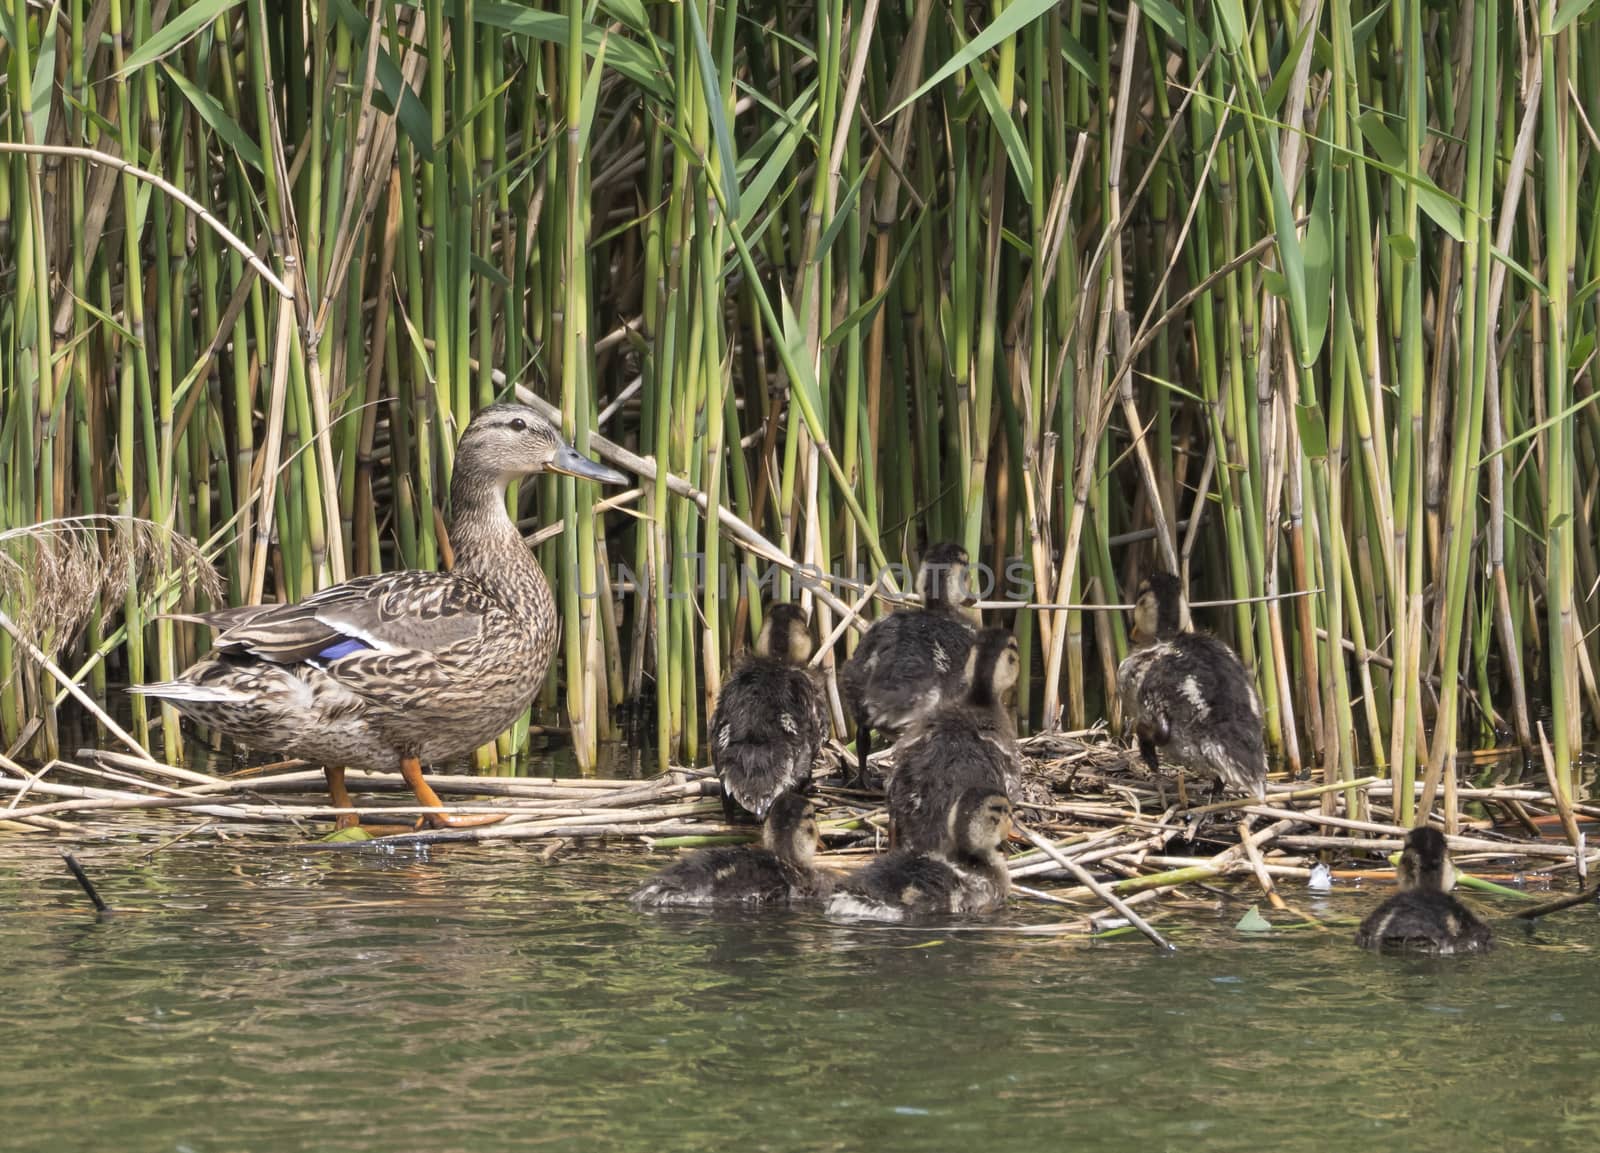 Wild Female Mallard duck with youngs ducklings. Anas platyrhynchos leaving the water hiding in reeds. Beauty in nature. Spring time. Birds swimming on lake. Young ones. by Henkeova